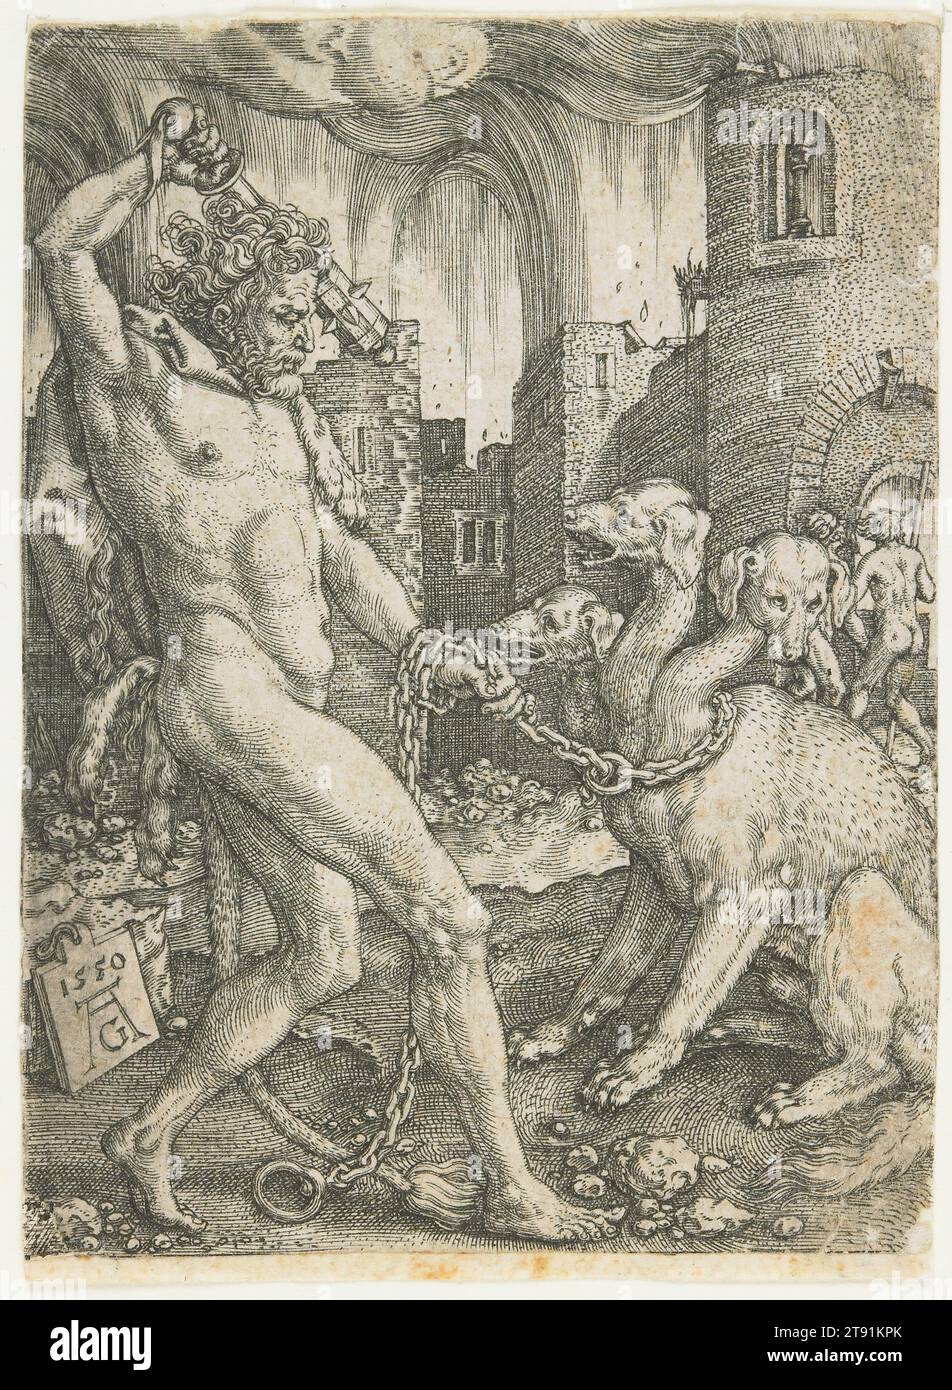 Hercules Chains Cerberus, 1550, Heinrich Aldegrever, German, 1502–after 1555/61, 3 5/8 x 2 11/16 in. (9.21 x 6.83 cm) (image), Engraving, Germany, 16th century, The deeds of Hercules were endlessly popular in the Renaissance as models of strength and virtue. Heinrich Aldegrever portrays the hero engaged in two particularly desperate labors. In one he had to crush the menacing nine-headed Hydra-difficult to do because each time a head was cut off, two appeared in its place. The other task was to descend to Hades and bring back Cerberus, the hideous beast guarding the entrance to the underworld Stock Photo